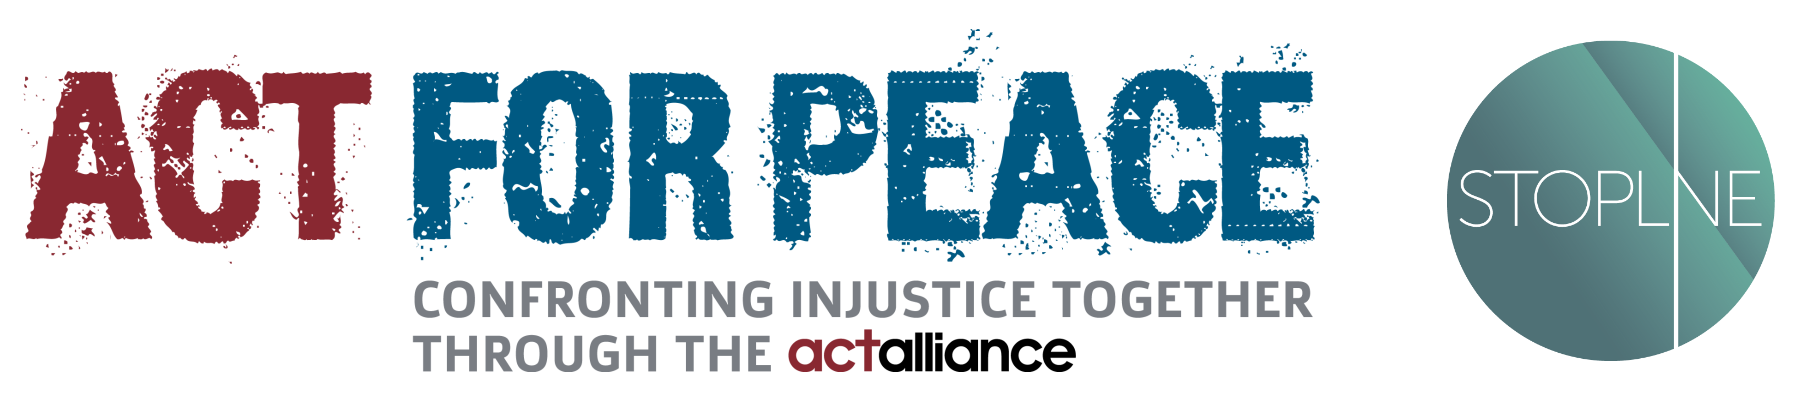 Act for Peace Online Reporting